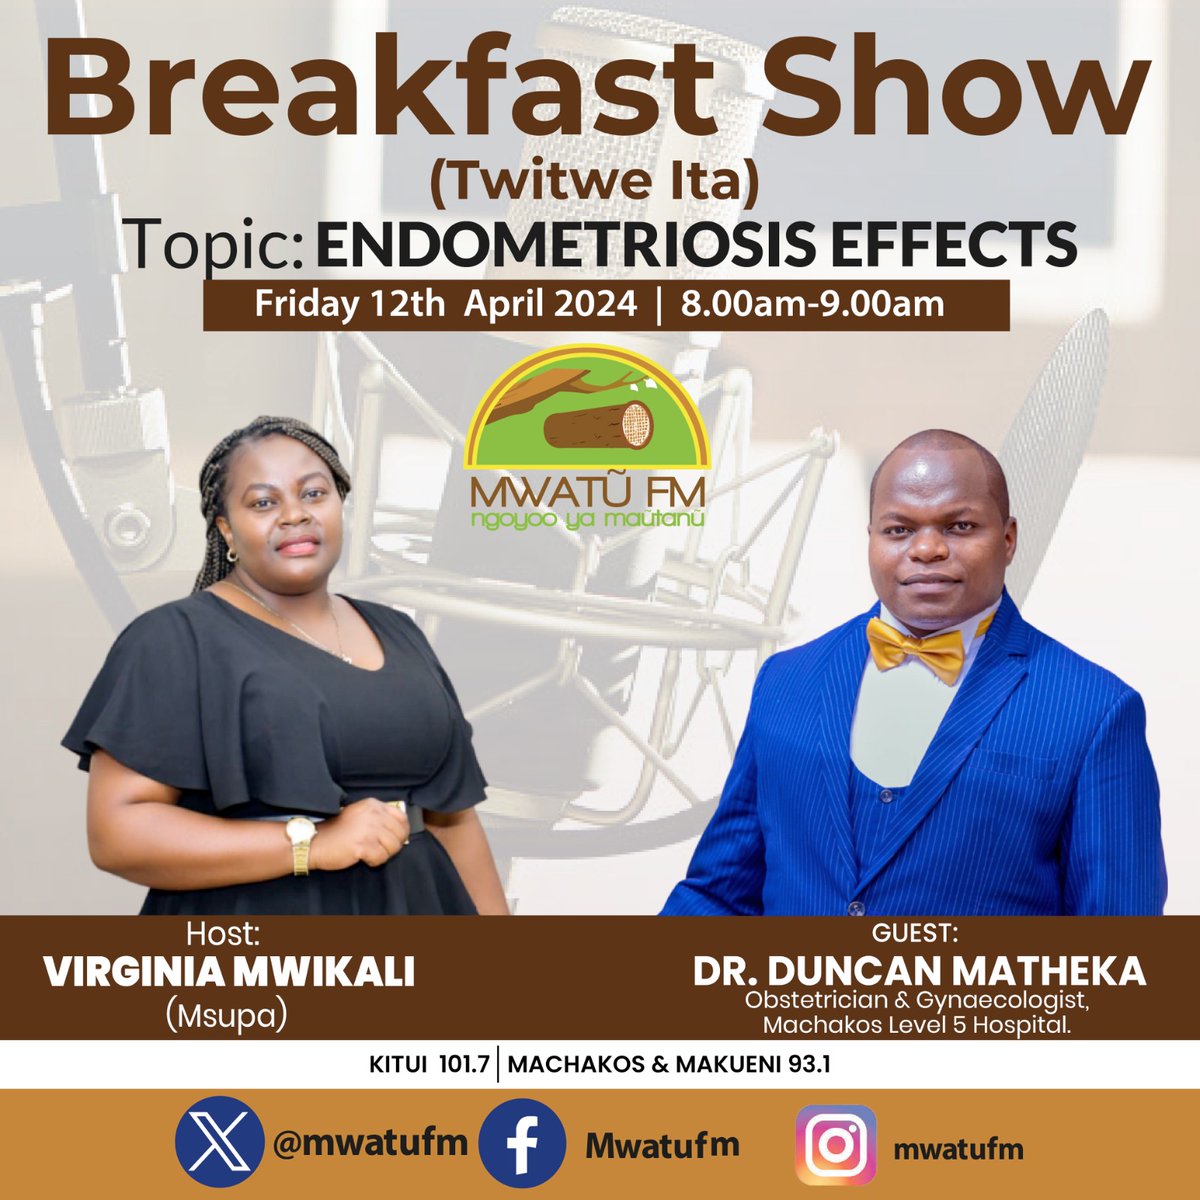 Tune in to a discussion on endometriosis on coming Friday 12th April at 8am 

#endometriosis 
#endometriosisawareness 
#endometriosisawarenessmonth 
#endometriosissupport 
#EndometriosisActionMonth 
#obstetricsandgynecology 
#GynecologicalHealth